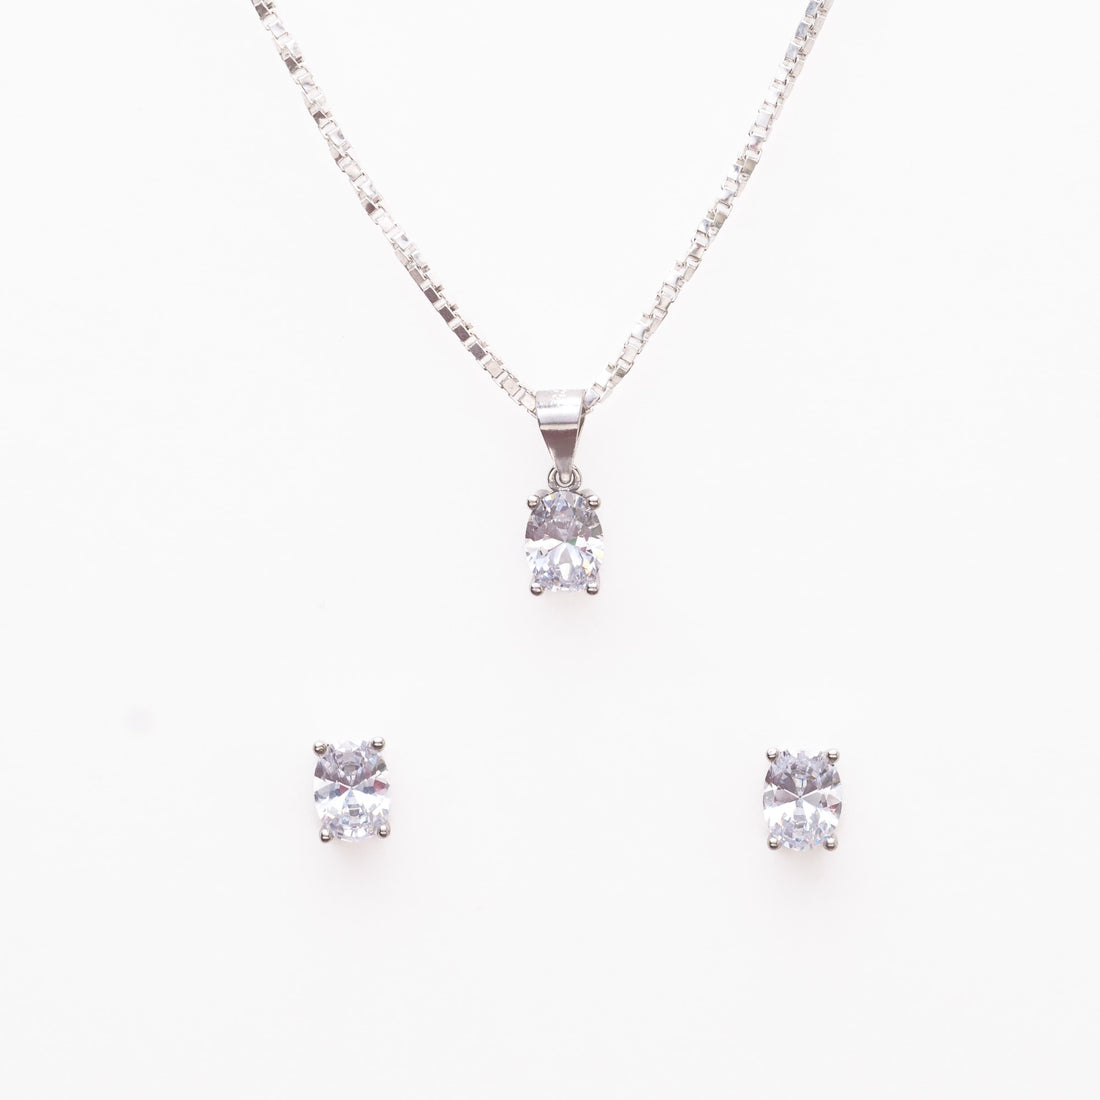 Silver Set Chain Pendant and Earrings with Finely Cut Stones for Women